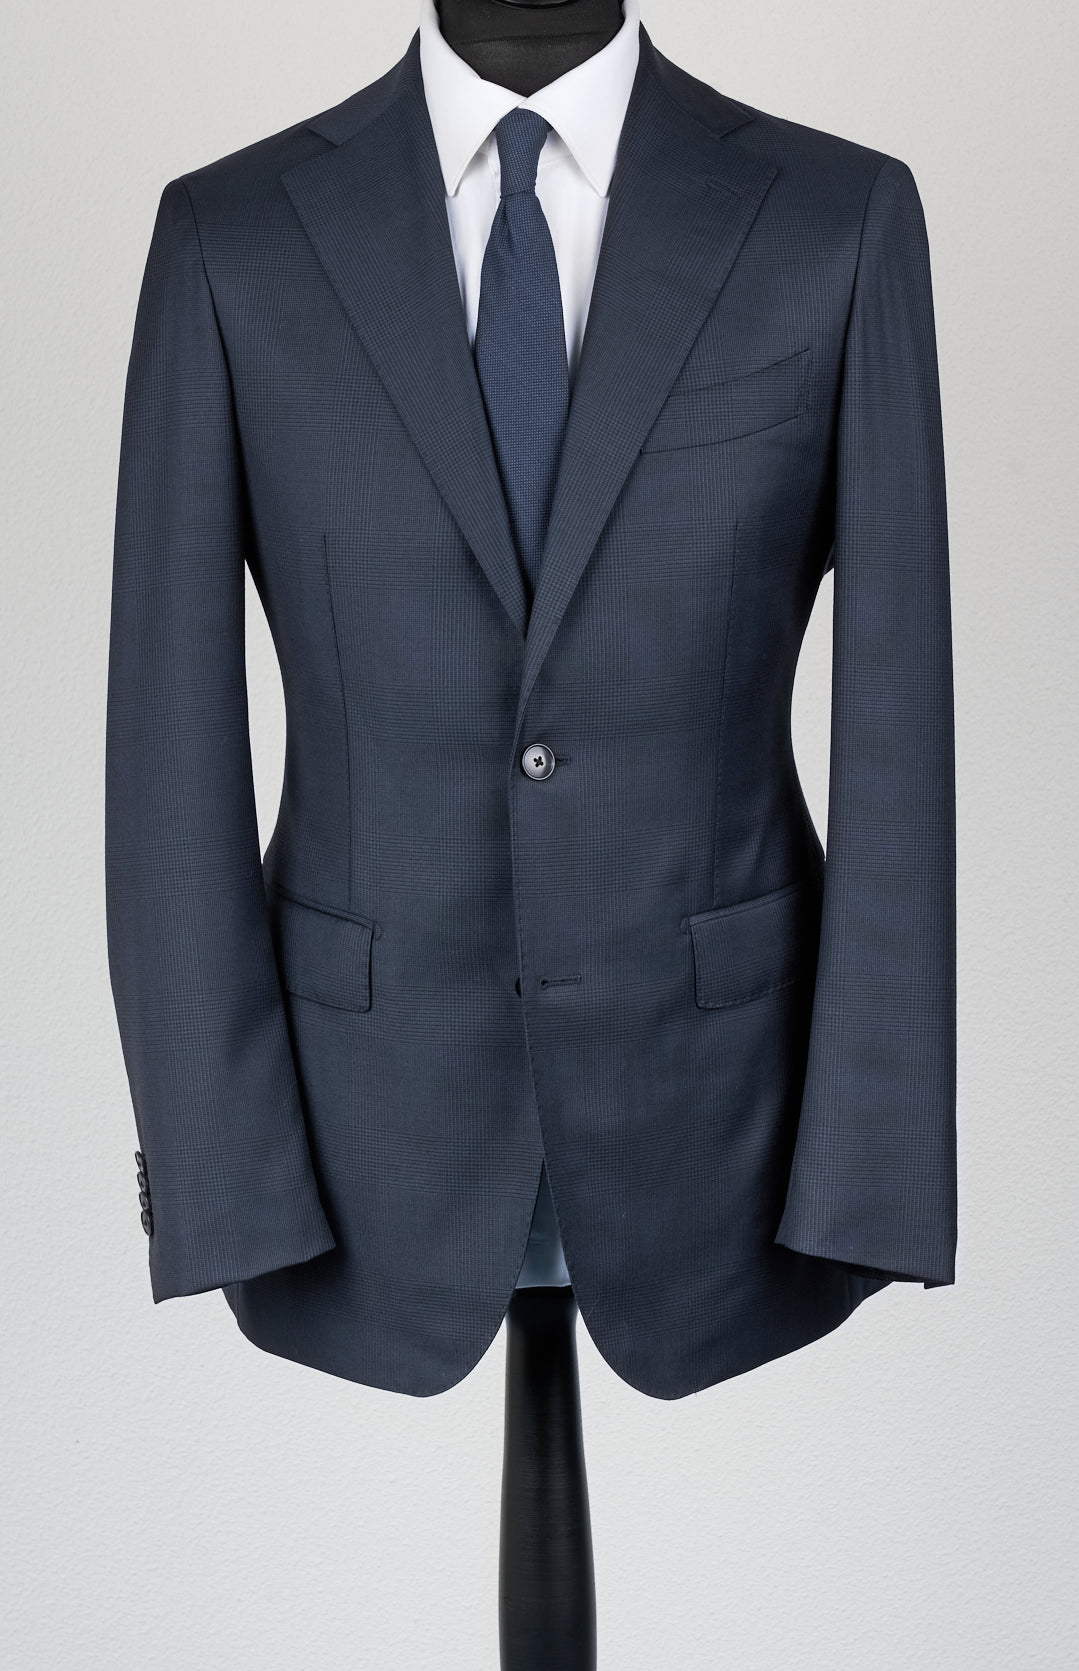 New SUITREVIEW Elmhurst Navy Check Pure Wool All Season Suit - Size 44R